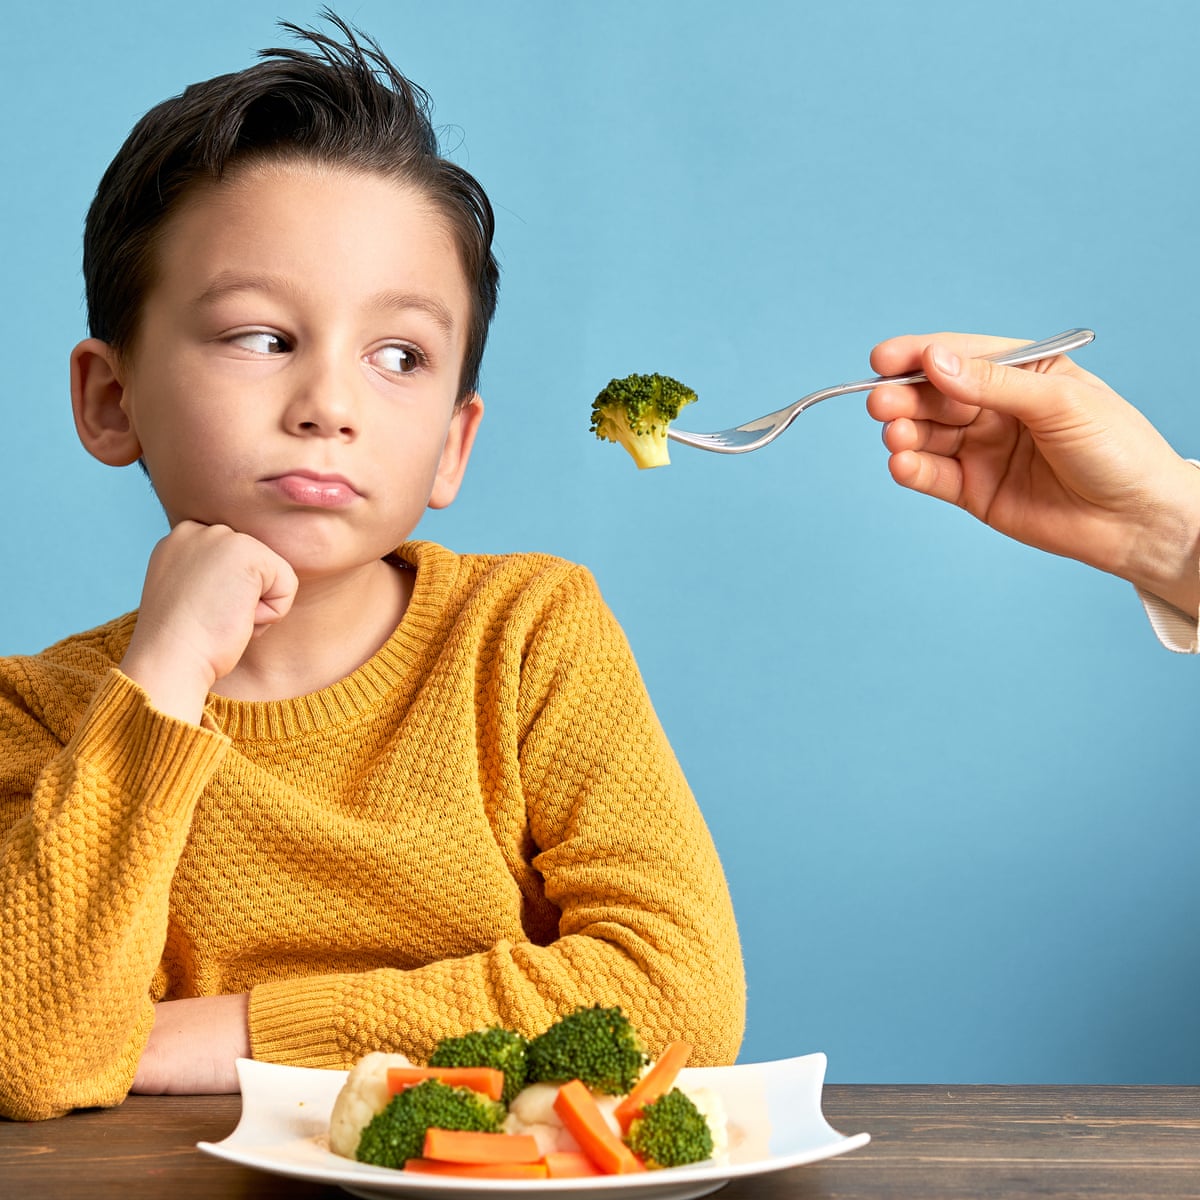 Five ways to get your children to eat vegetables | Parents and parenting |  The Guardian